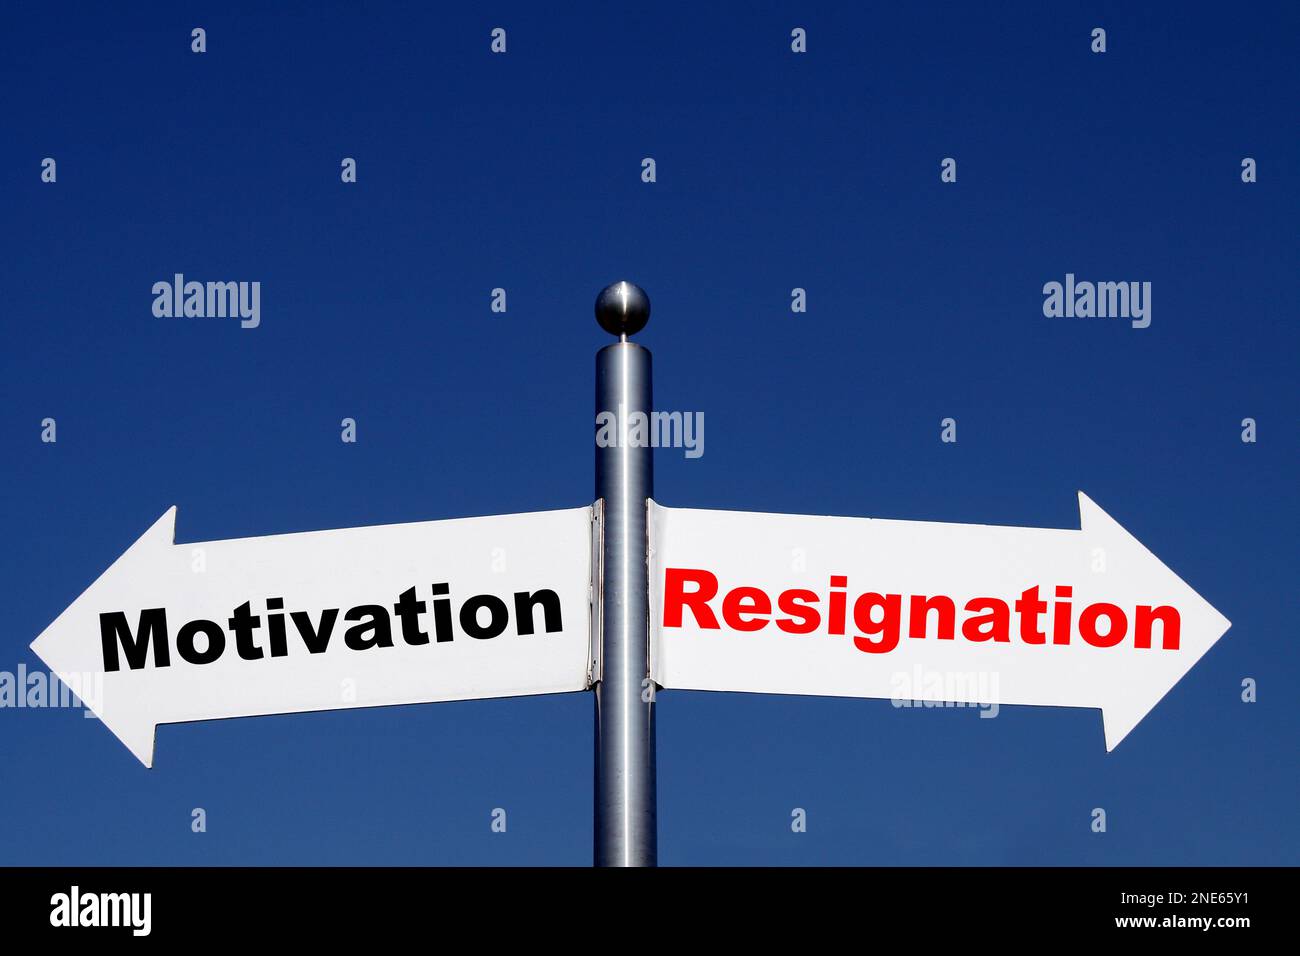 signposts pointing in different directions, options motivation - resignation Stock Photo